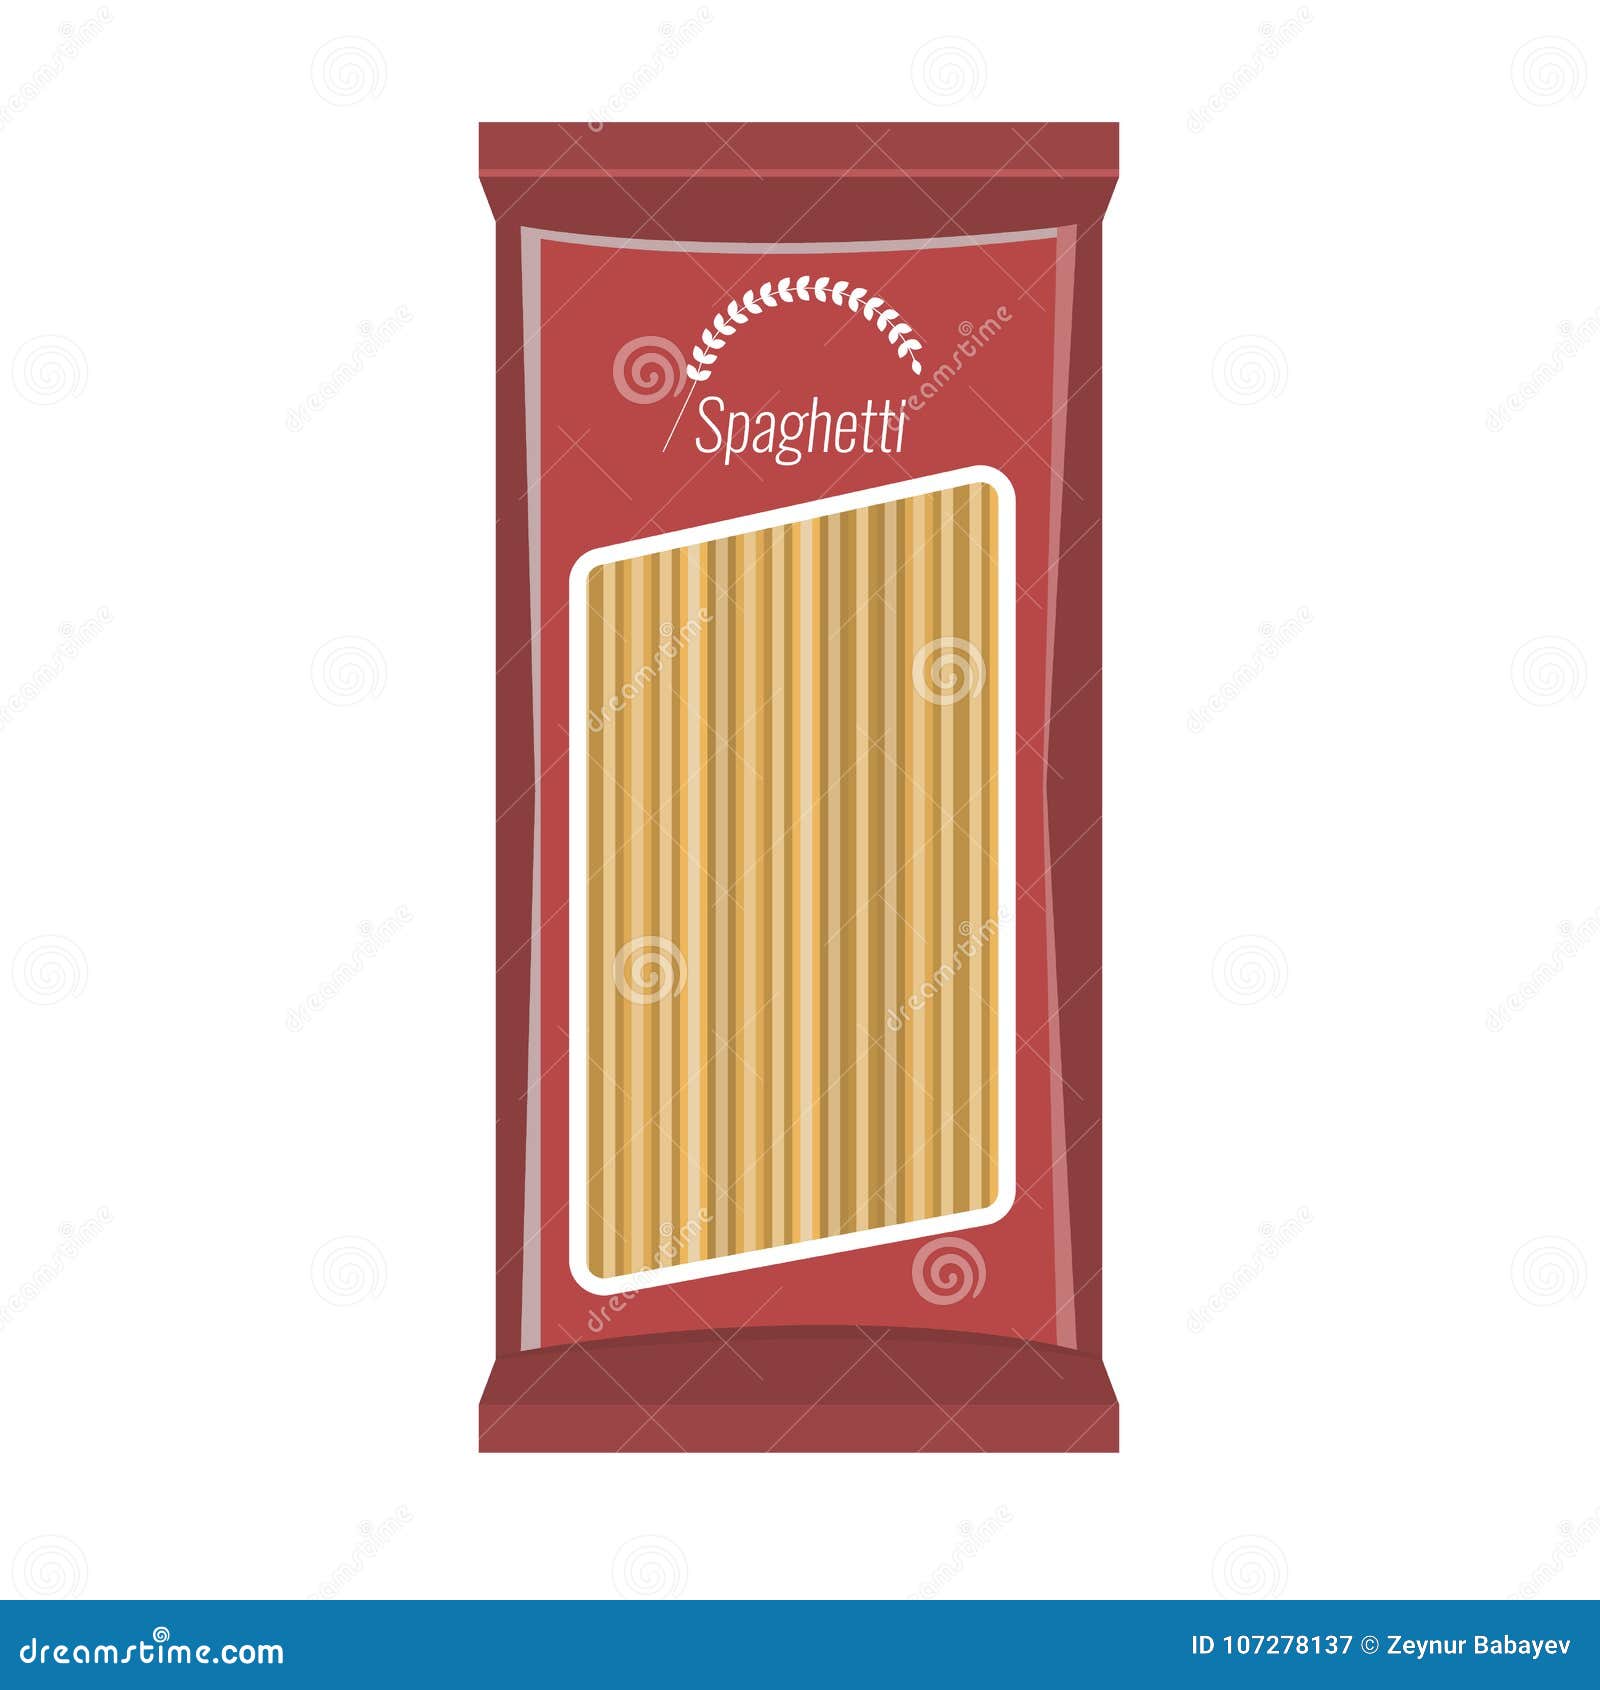 Download Spaghetti Or Pasta Package Mockup, Isolated On White ...